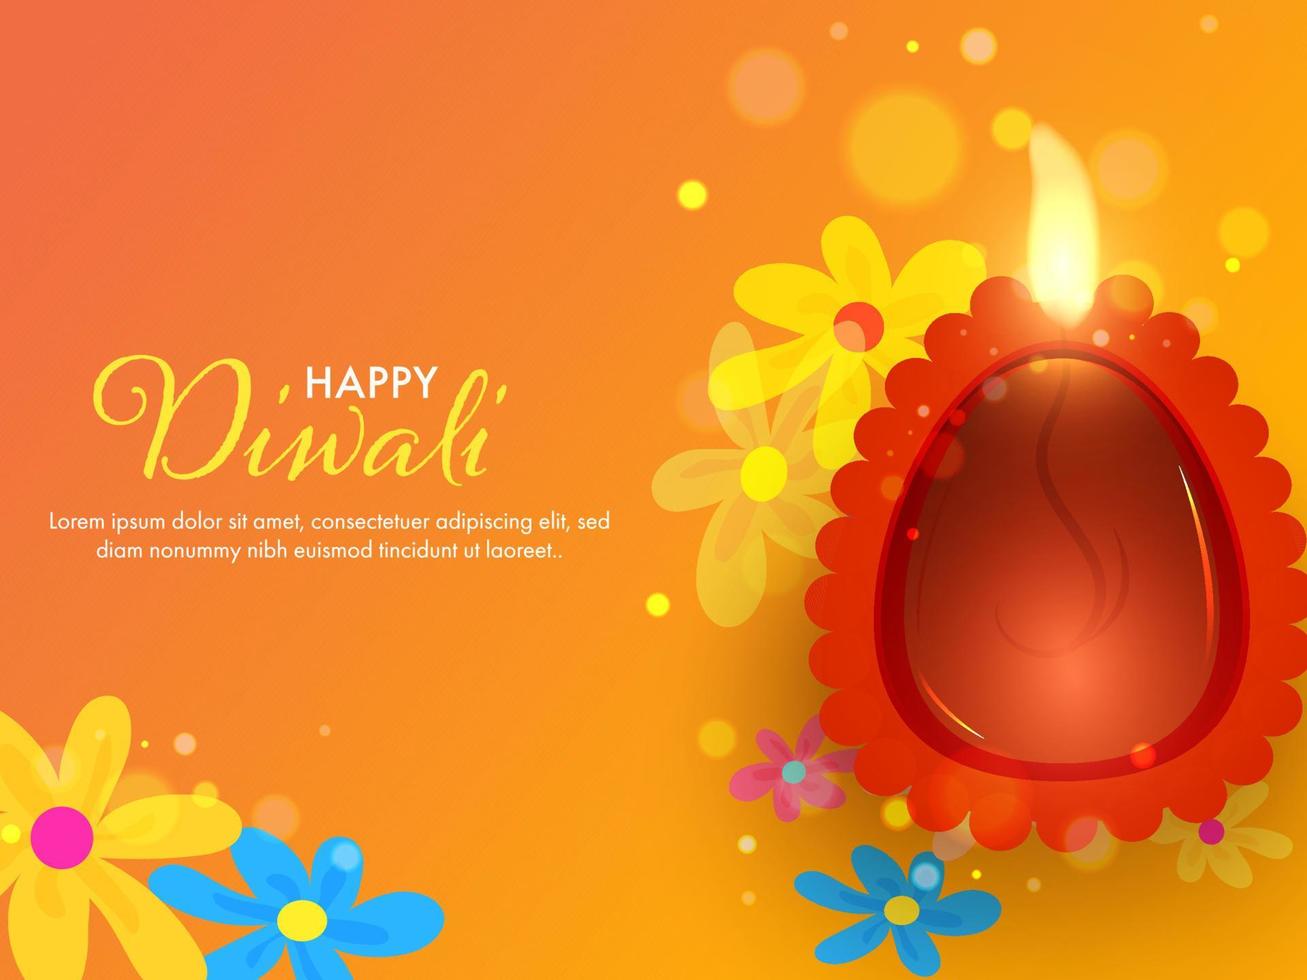 Happy Diwali Celebration Poster Design with Top View of Illuminated Oil Lamp and Flowers Decorated on Orange Background. vector